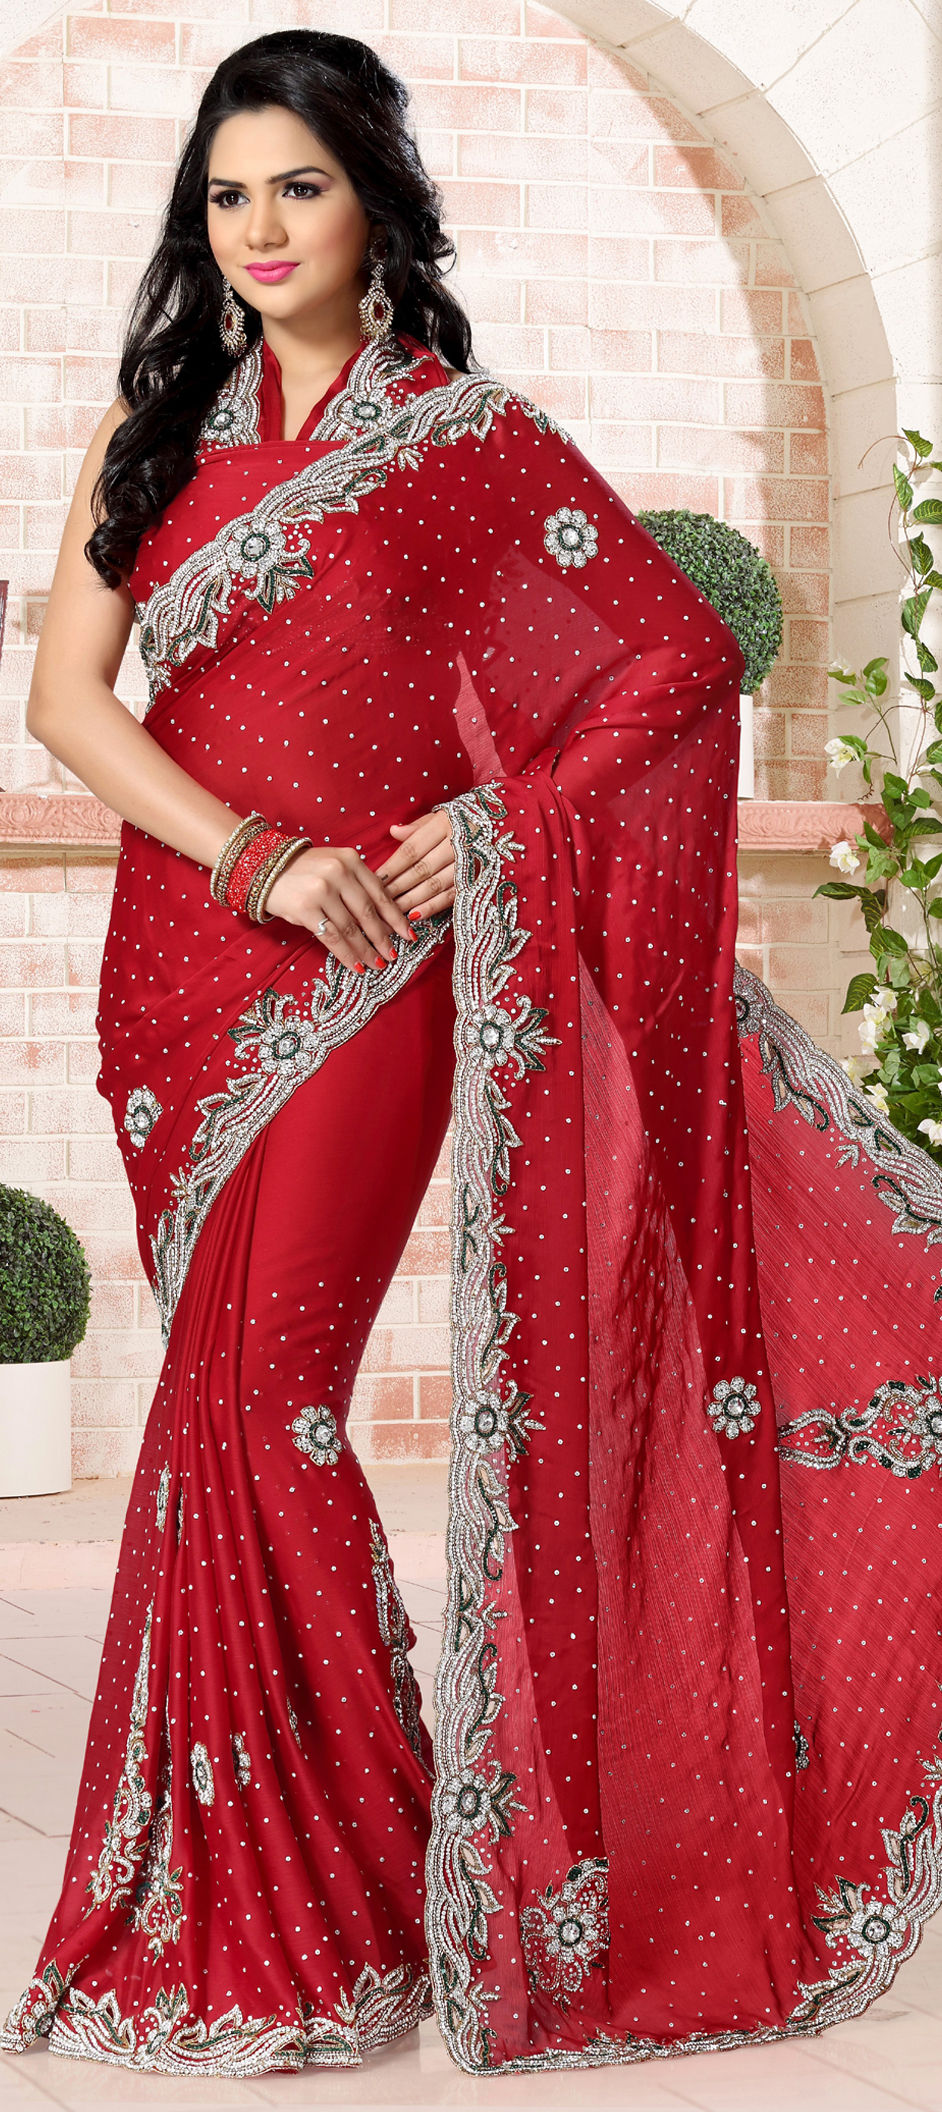 burgundy-red-saree -in-satin-with-floral-print-and-contrasting-peach-sequins-ruffle-on-the-border-and- blouse-online-kalki-fashion-m001ra453y-sg62926_1_ - Kalki Fashion Blog –  Latest Fashion Trends, Bridal Fashion, Style Tips, News and Many More